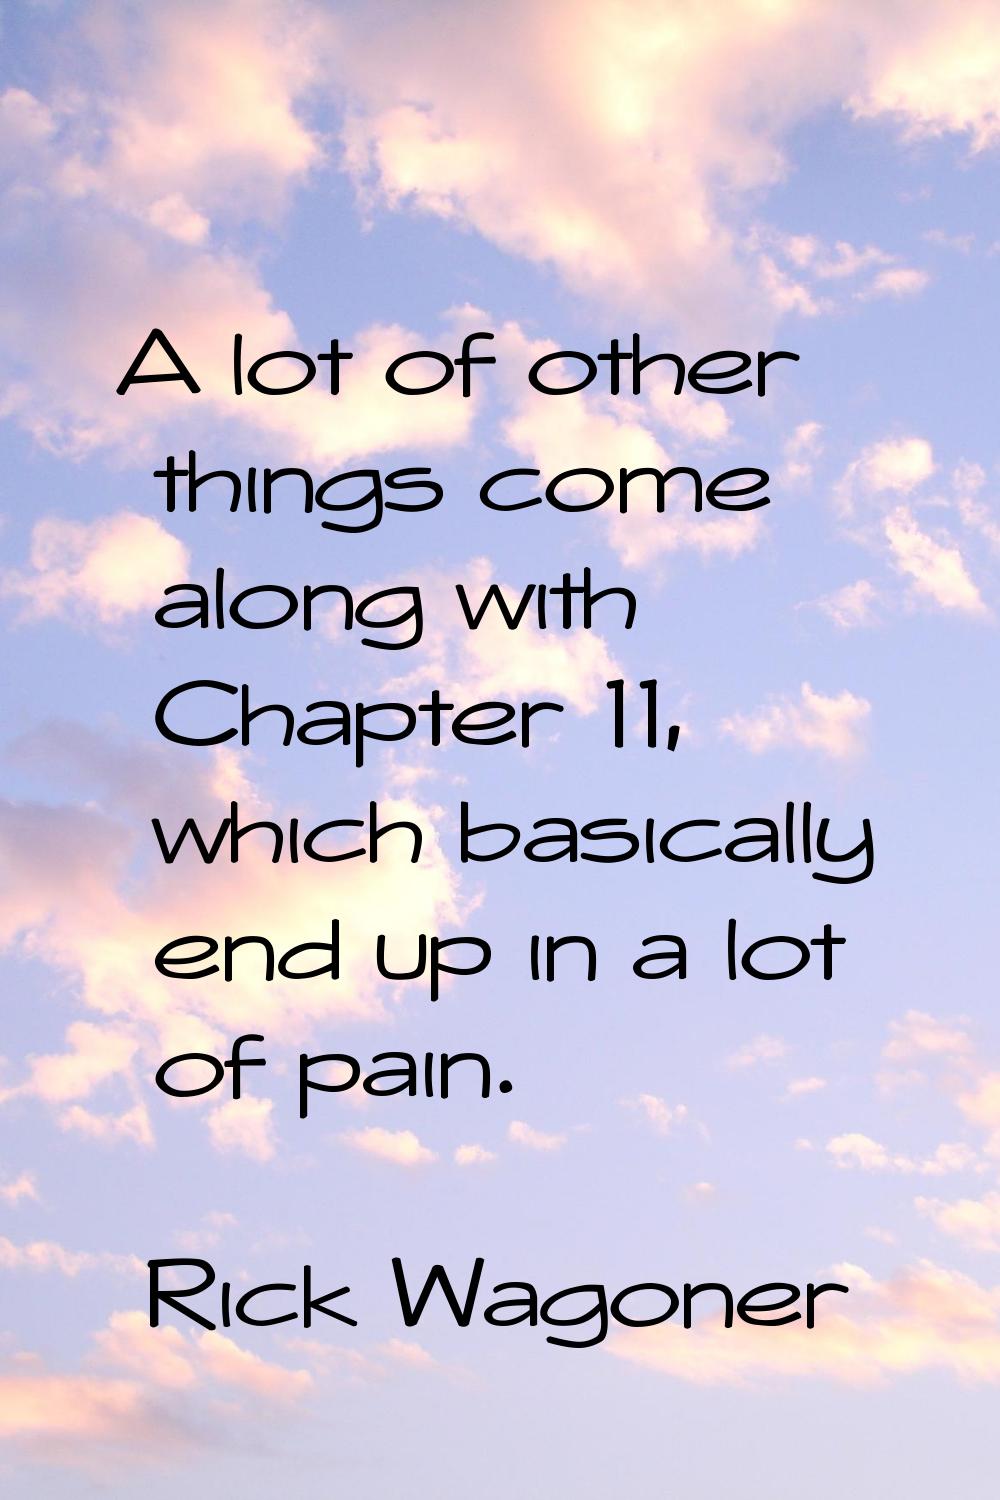 A lot of other things come along with Chapter 11, which basically end up in a lot of pain.